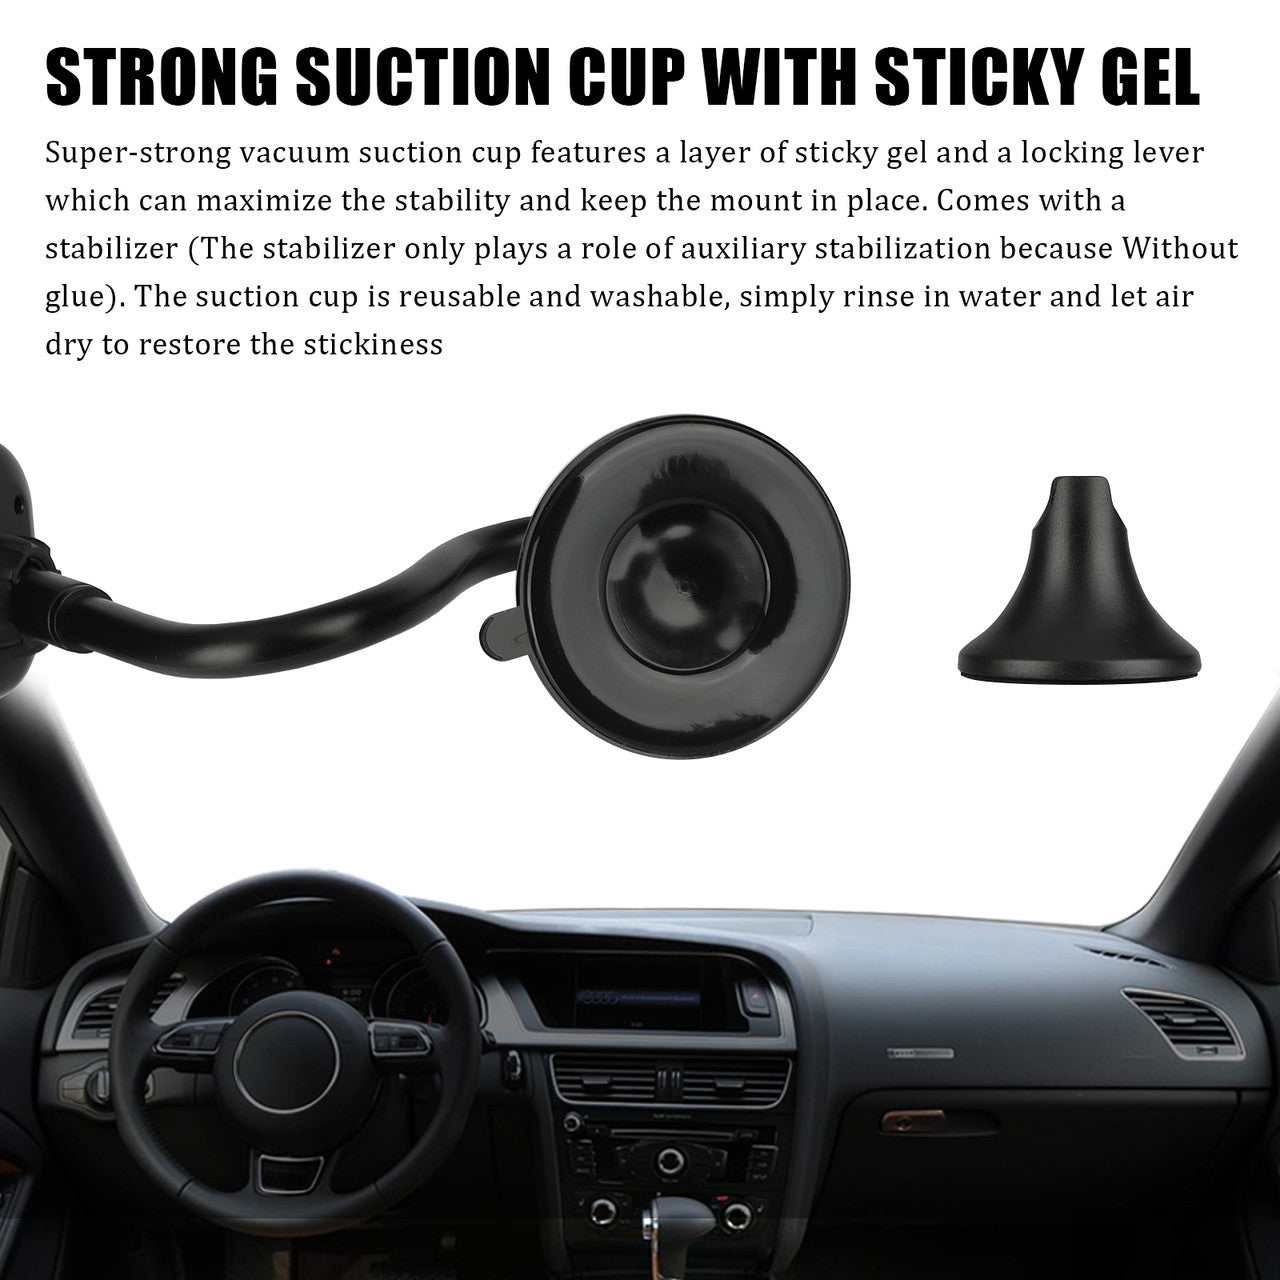 Cradle Mount Windshield Car Holder Stand for Mobile Devices